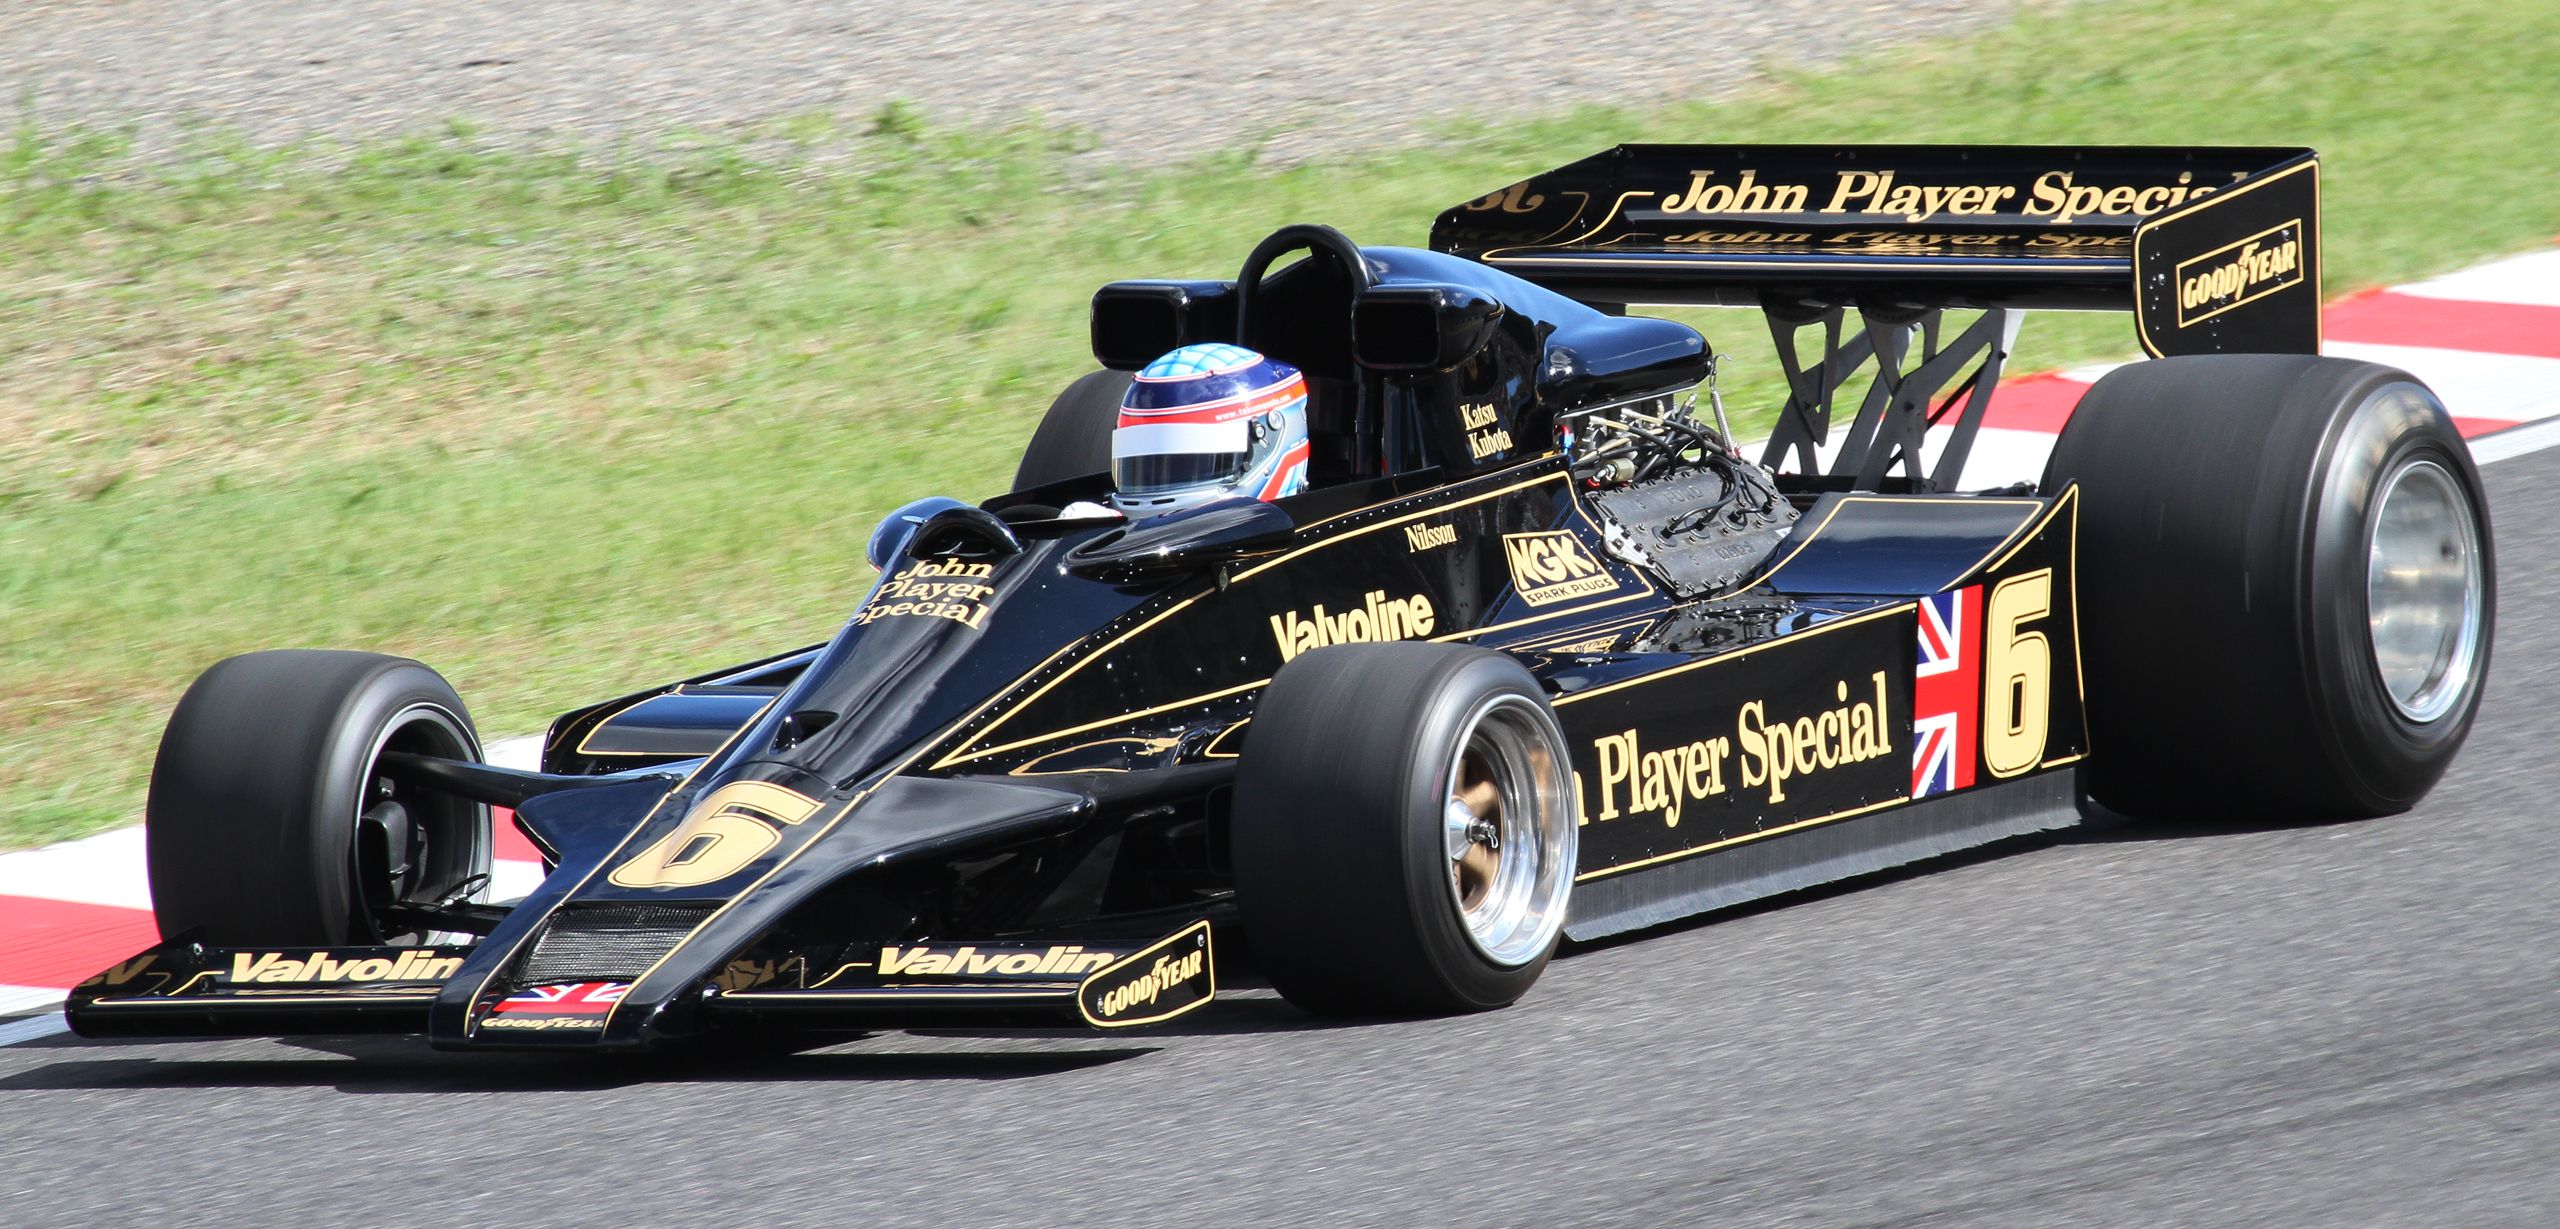 How Airplane Wing Aerodynamics Helped Lotus Design A Better F1 Car